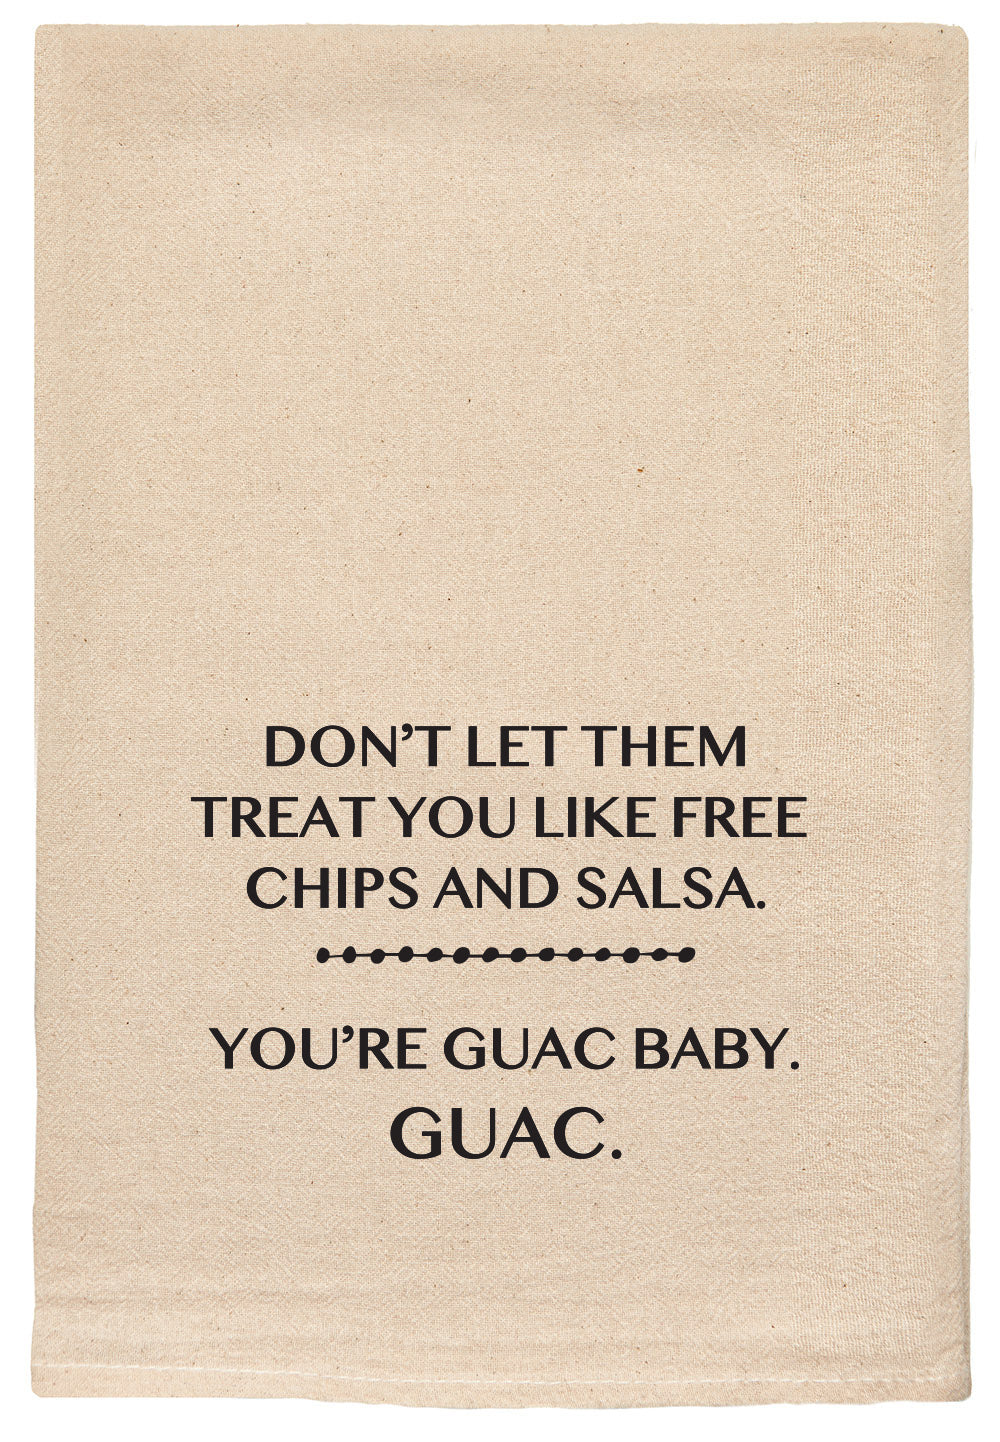 Don't let them treat you like free chips and salsa. You're guac baby, guac